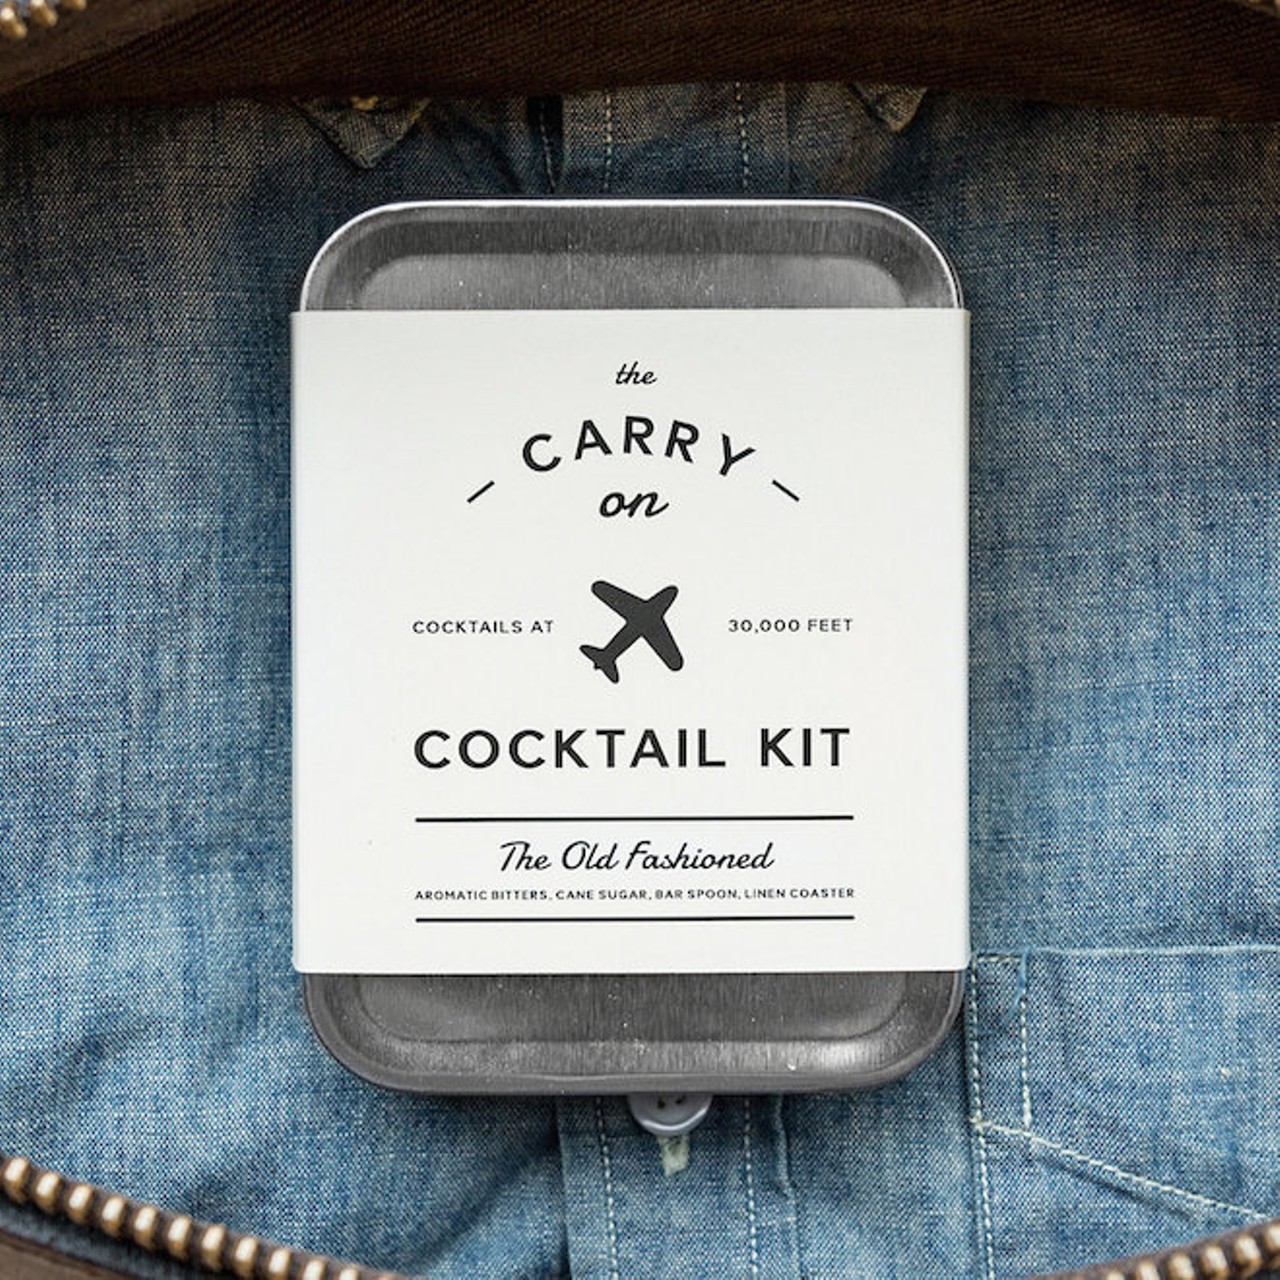 TSA restrictions on liquids carried onto planes have, among other things, doomed travelers to long stretches in the air without access to civilized drinking. Online cocktail mag Punch and W&P Design teamed up to create the Carry On Cocktail Kit to stave off that very problem &#150; the tiny tin is stocked with everything you need to mix two perfect Old Fashioneds at cruising altitude, from bitters to muddler, right down to a linen napkin. All you need do is procure a mini whiskey (or two) from the drinks cart. Bottoms way, way up! ($24, carryoncocktailkit.com)